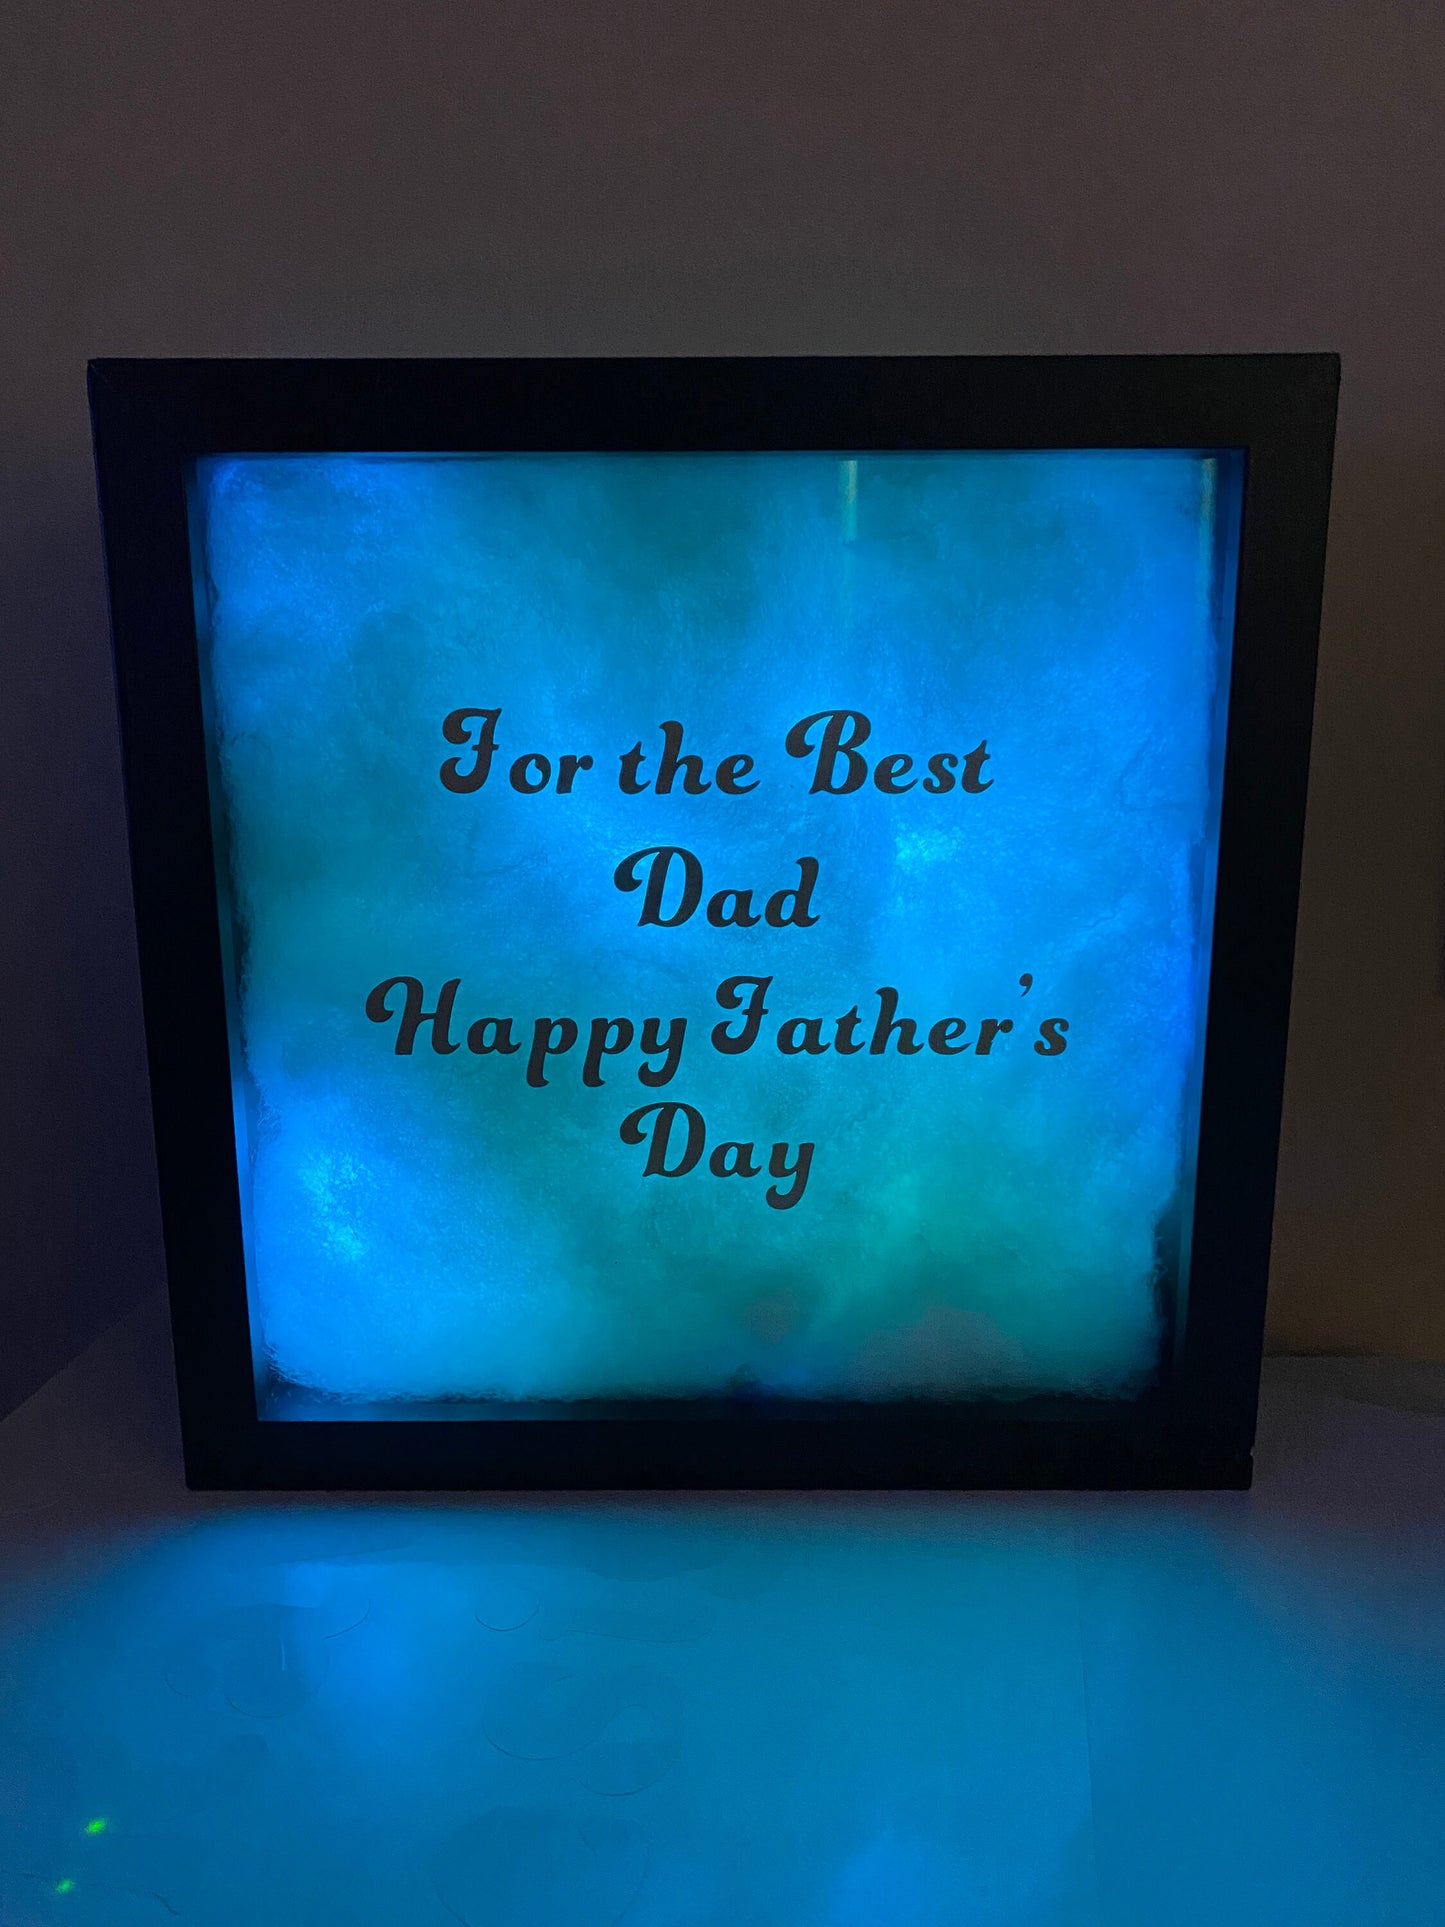 Shadow Box With Personalization LED Cloud Effect, Bedside Table Lamp, Desk Lamp, Wall light